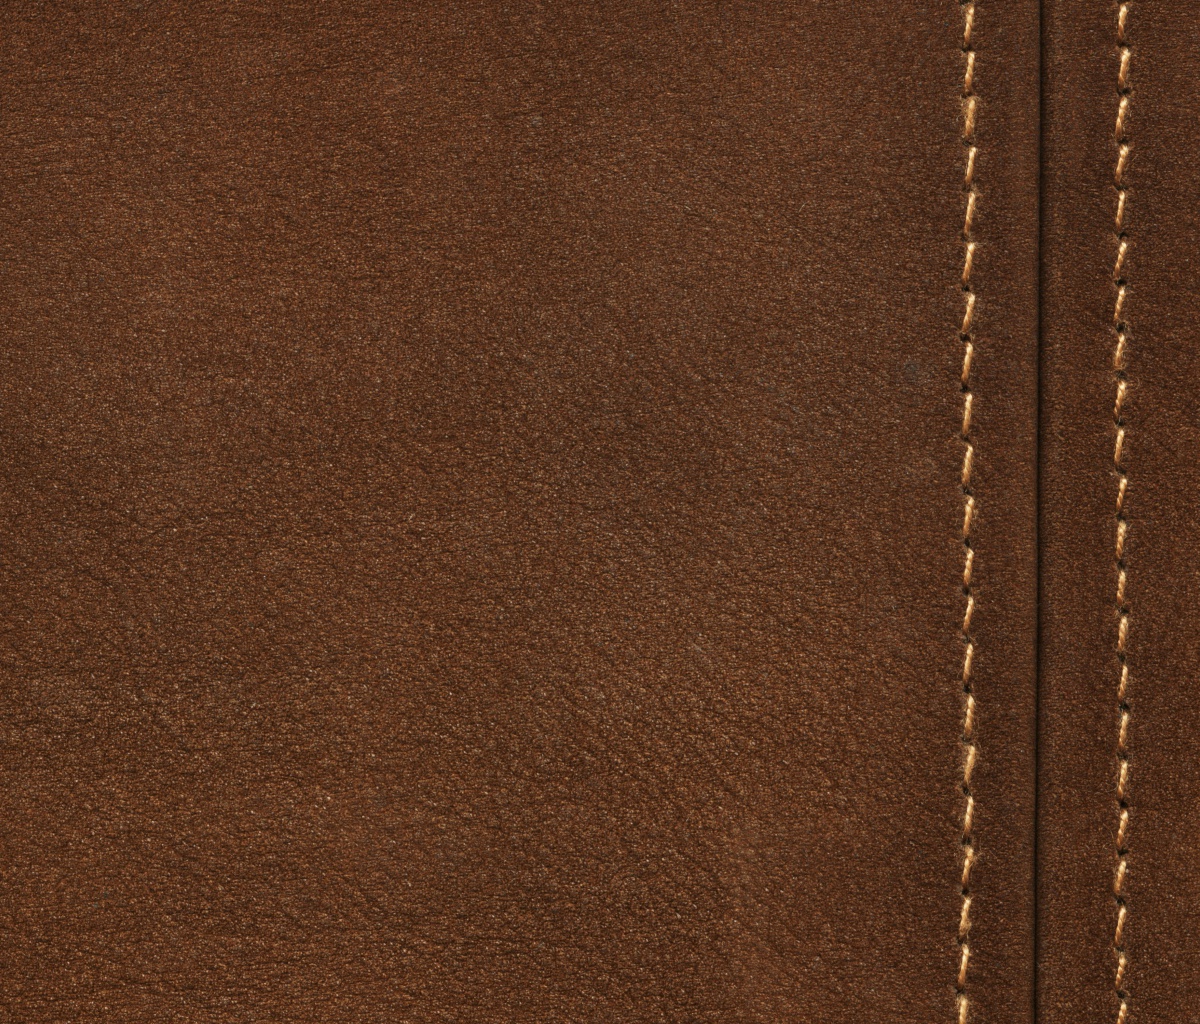 Das Brown Leather with Seam Wallpaper 1200x1024